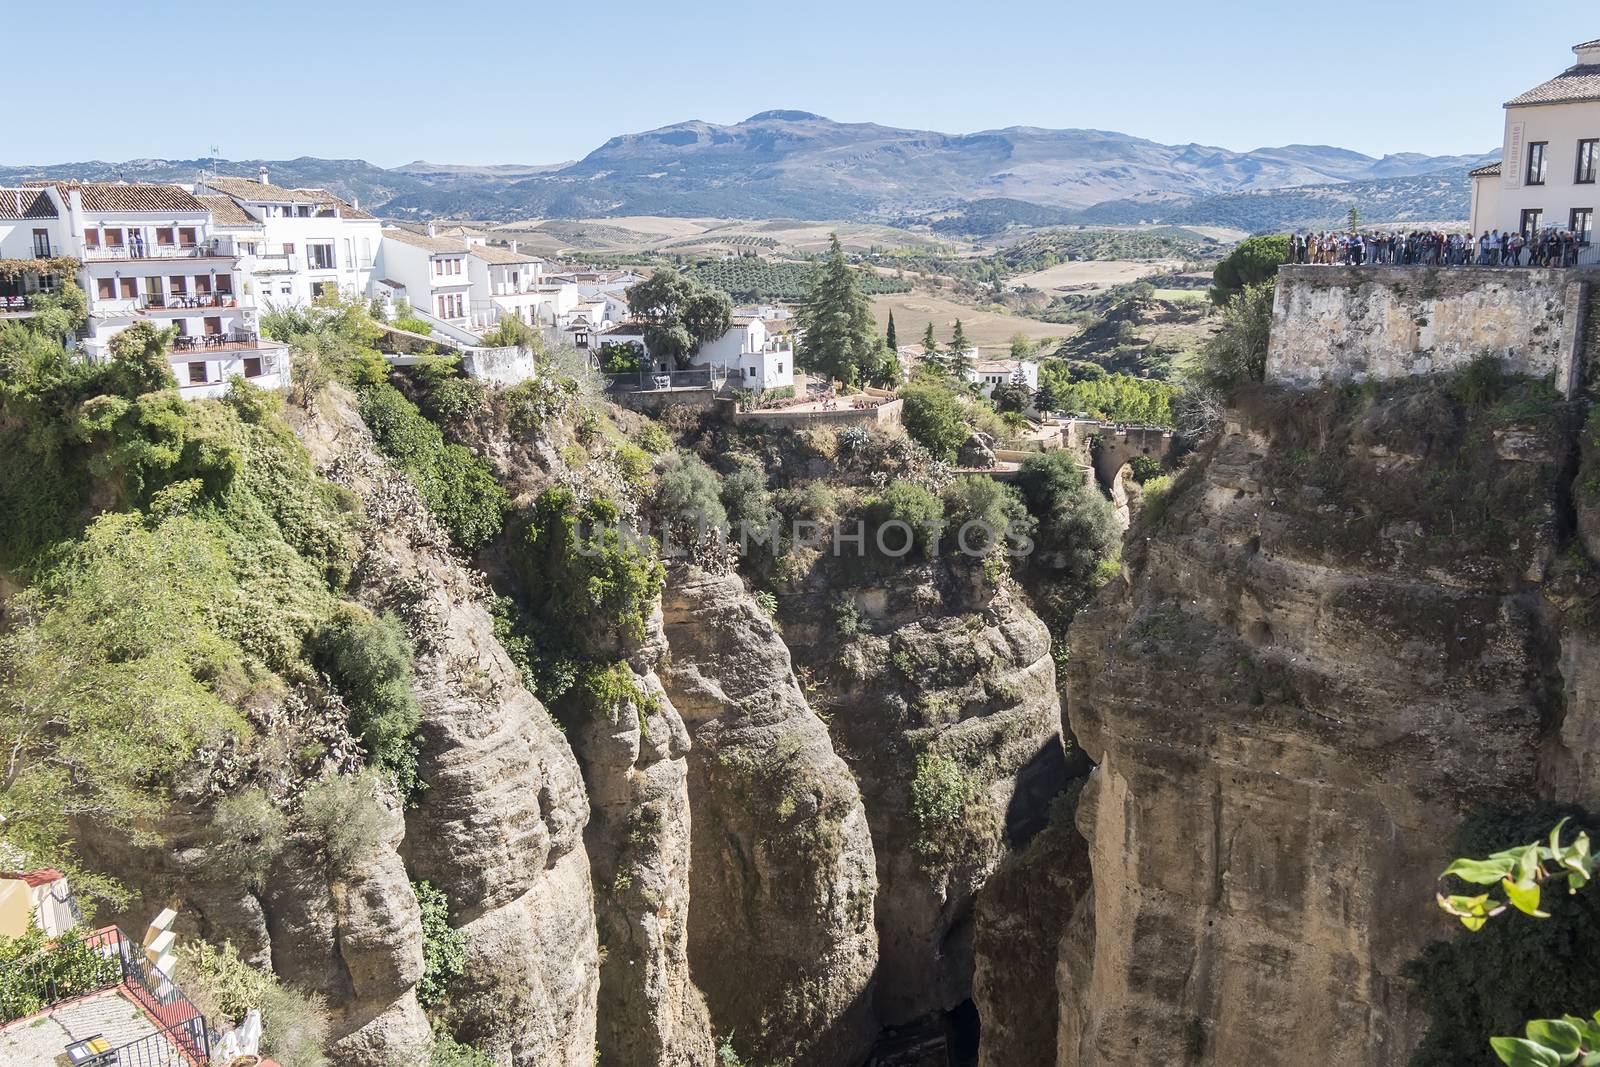 View from the new Bridge over Guadalevin River in Ronda, Malaga, Spain. Popular landmark in the evening